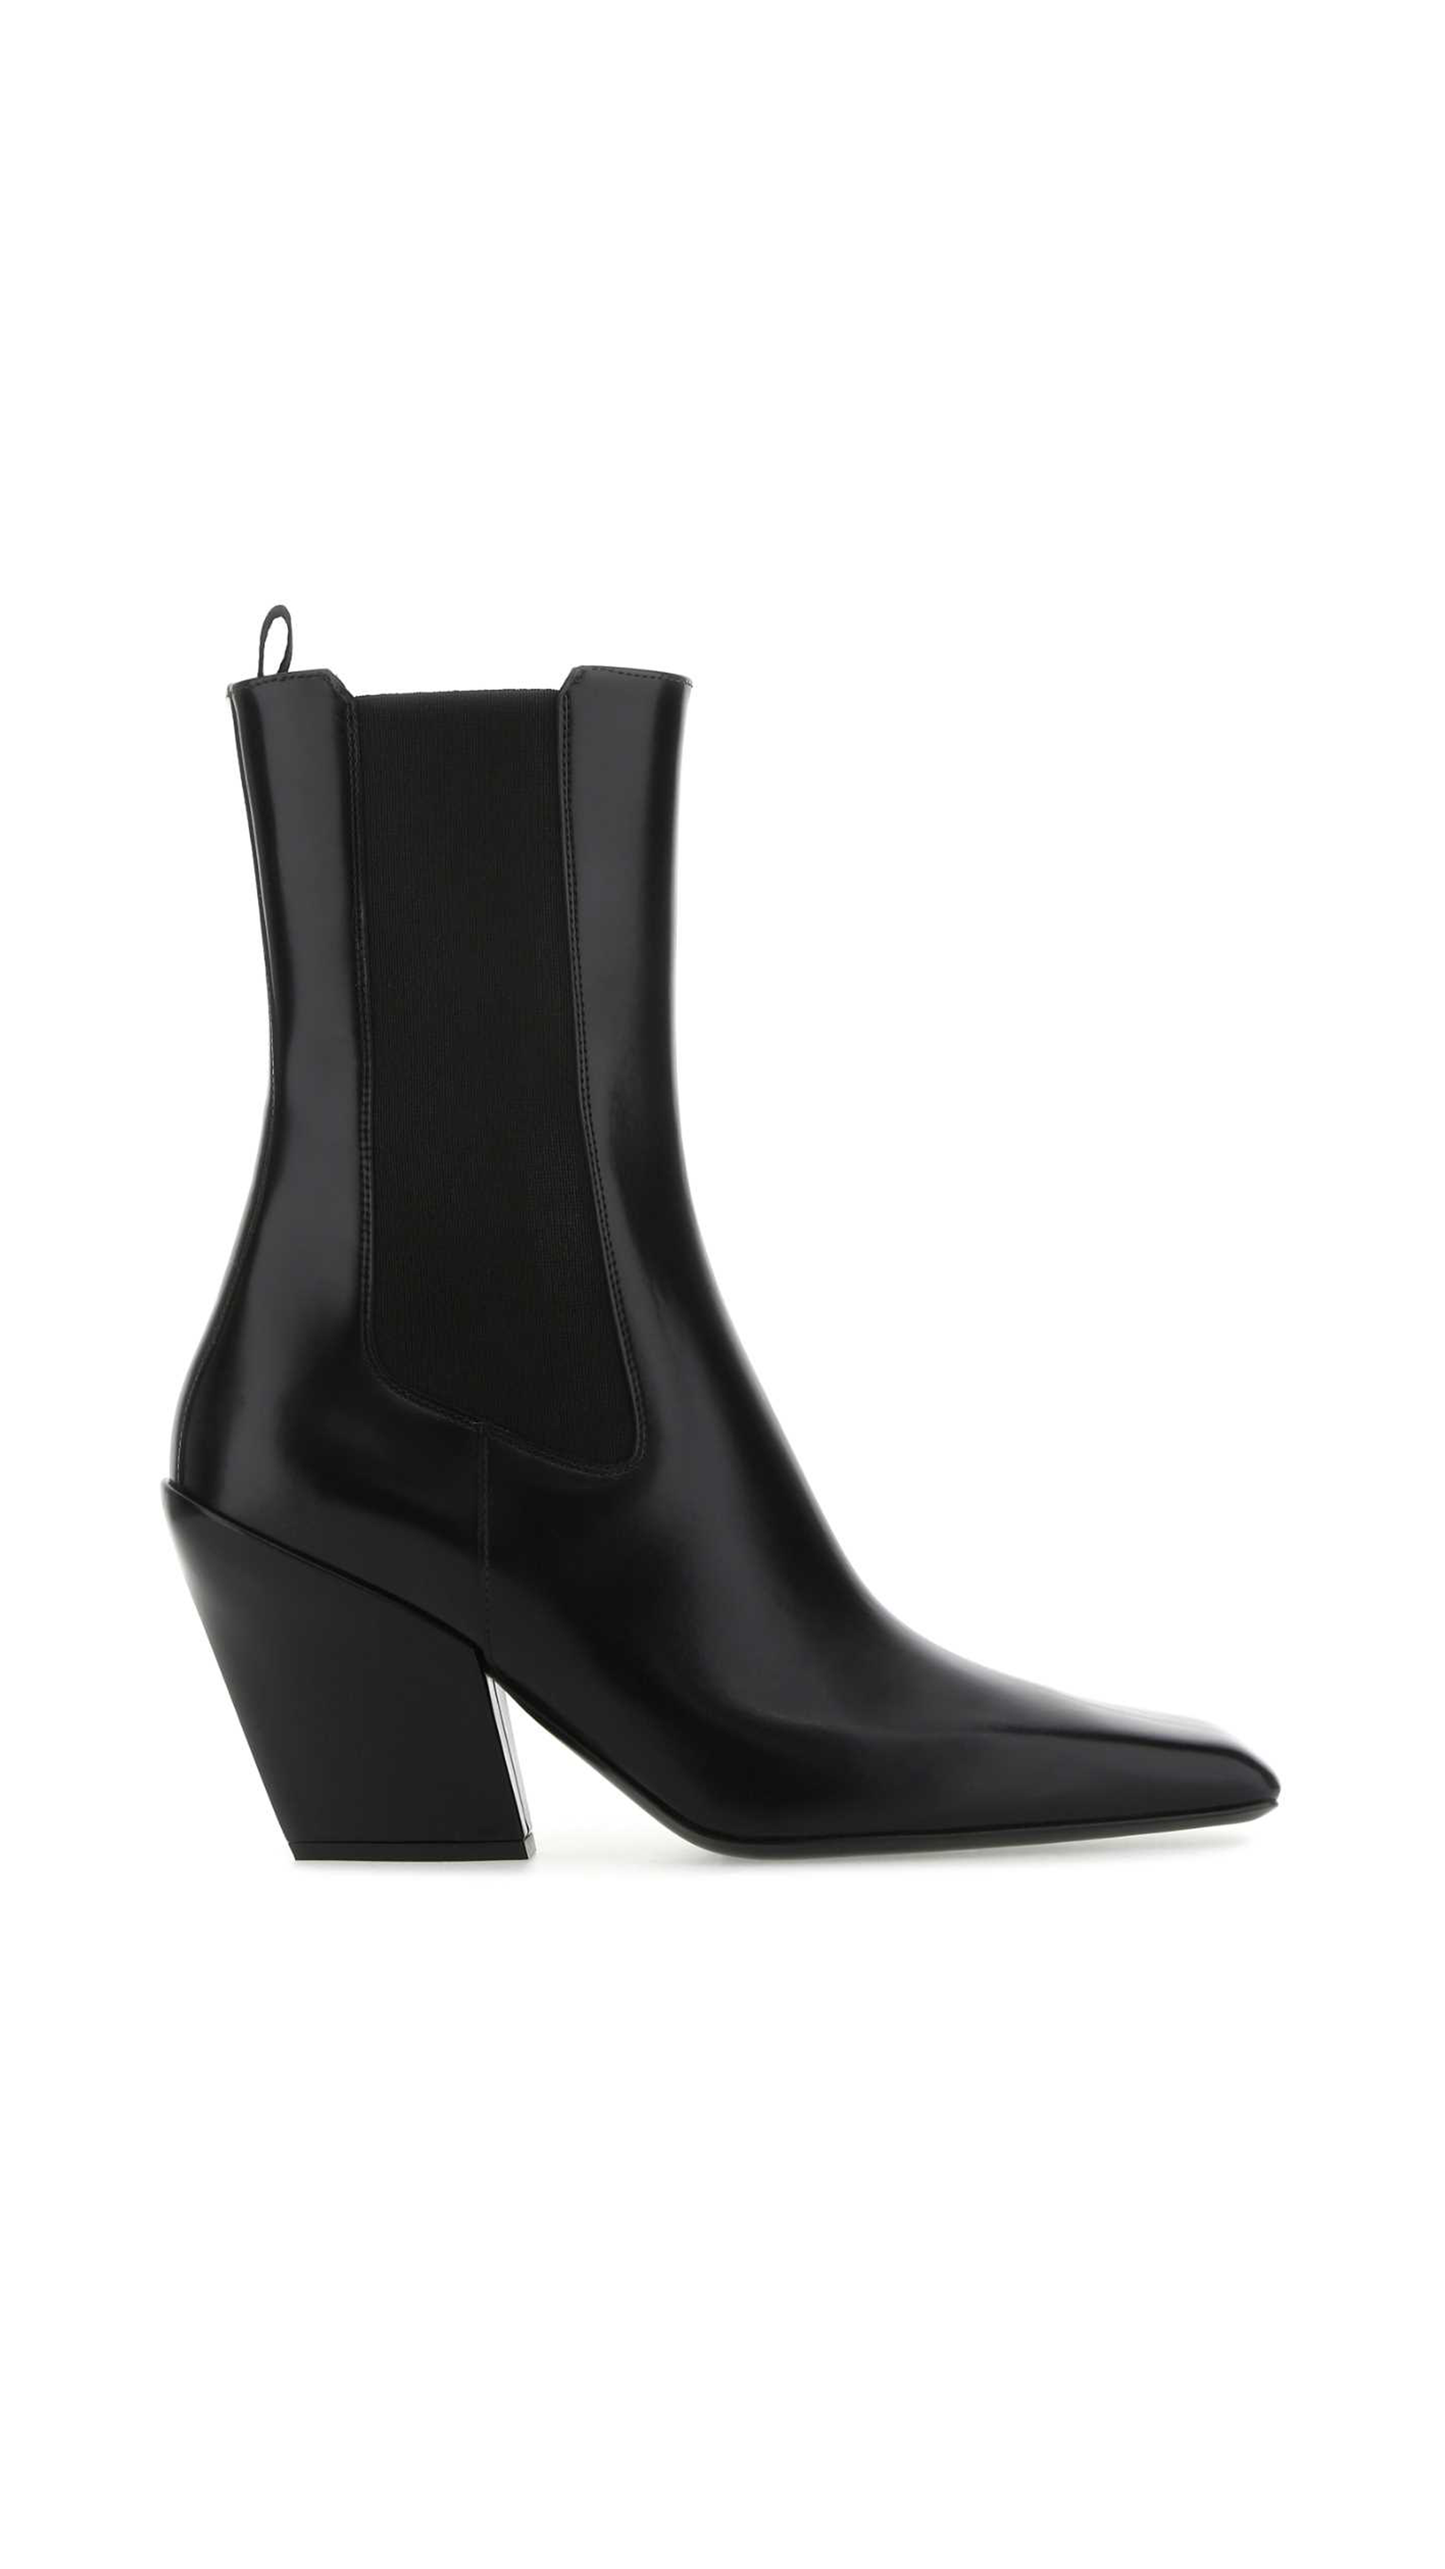 Brushed Leather Western Square-toe Boots - Black